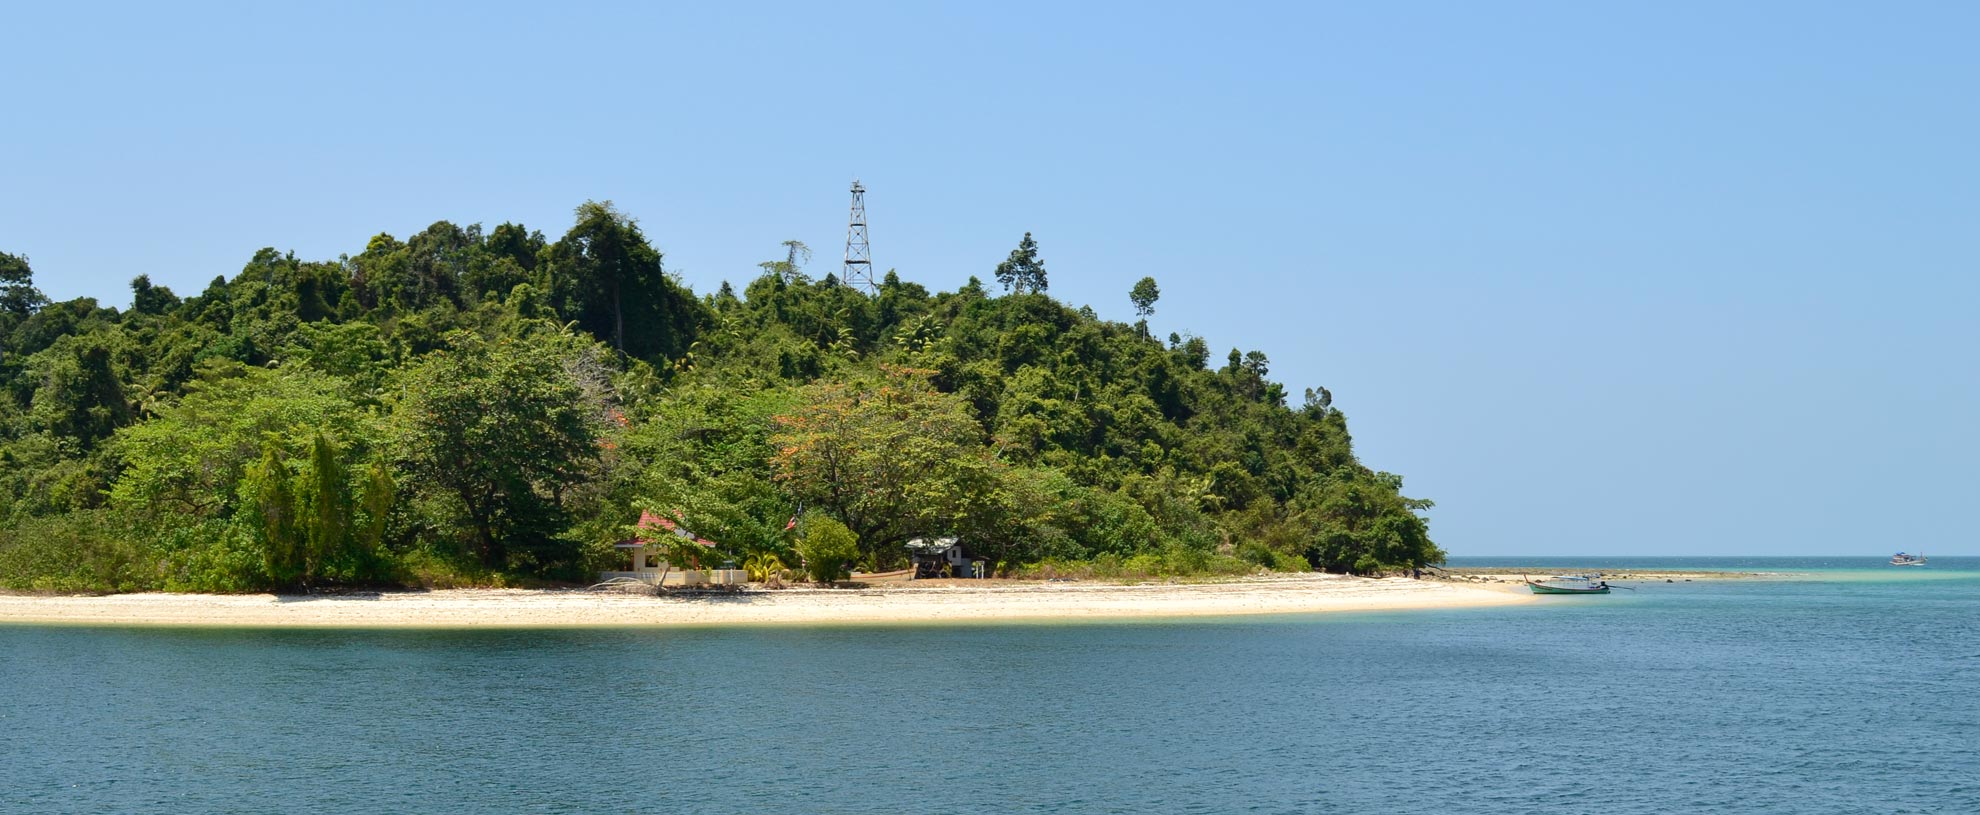 Adang Archipelago looking out over the headland and crystal clear waters